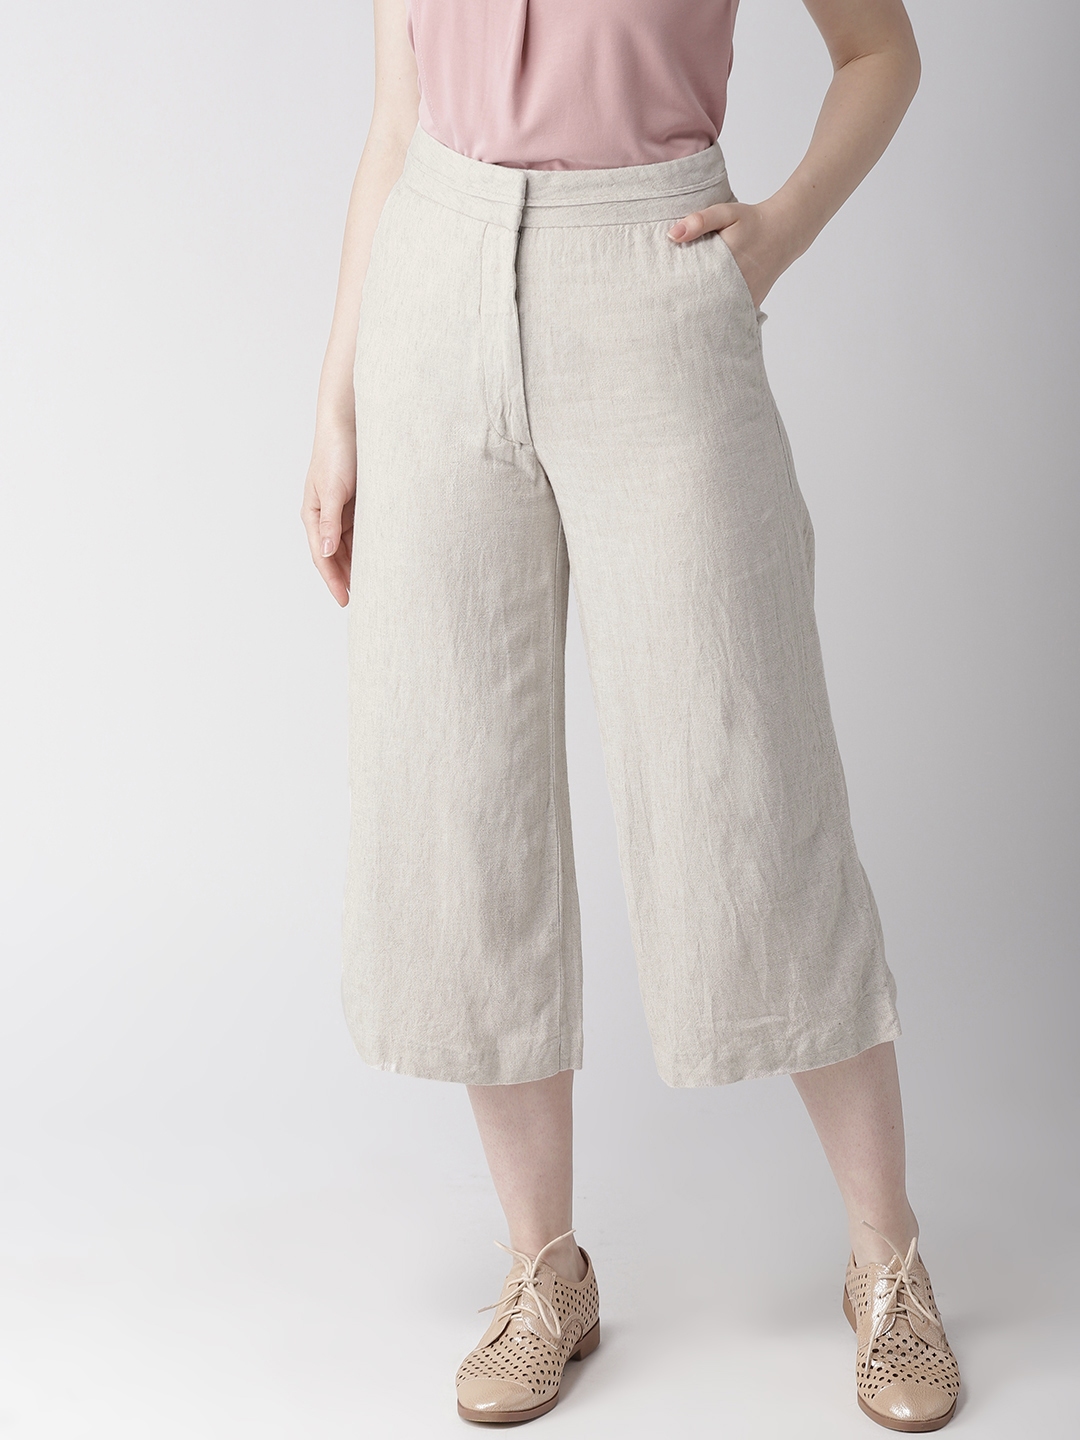 Sample Holebrook Jennie Culotte Trousers Ladies  WhiteNavy  Small